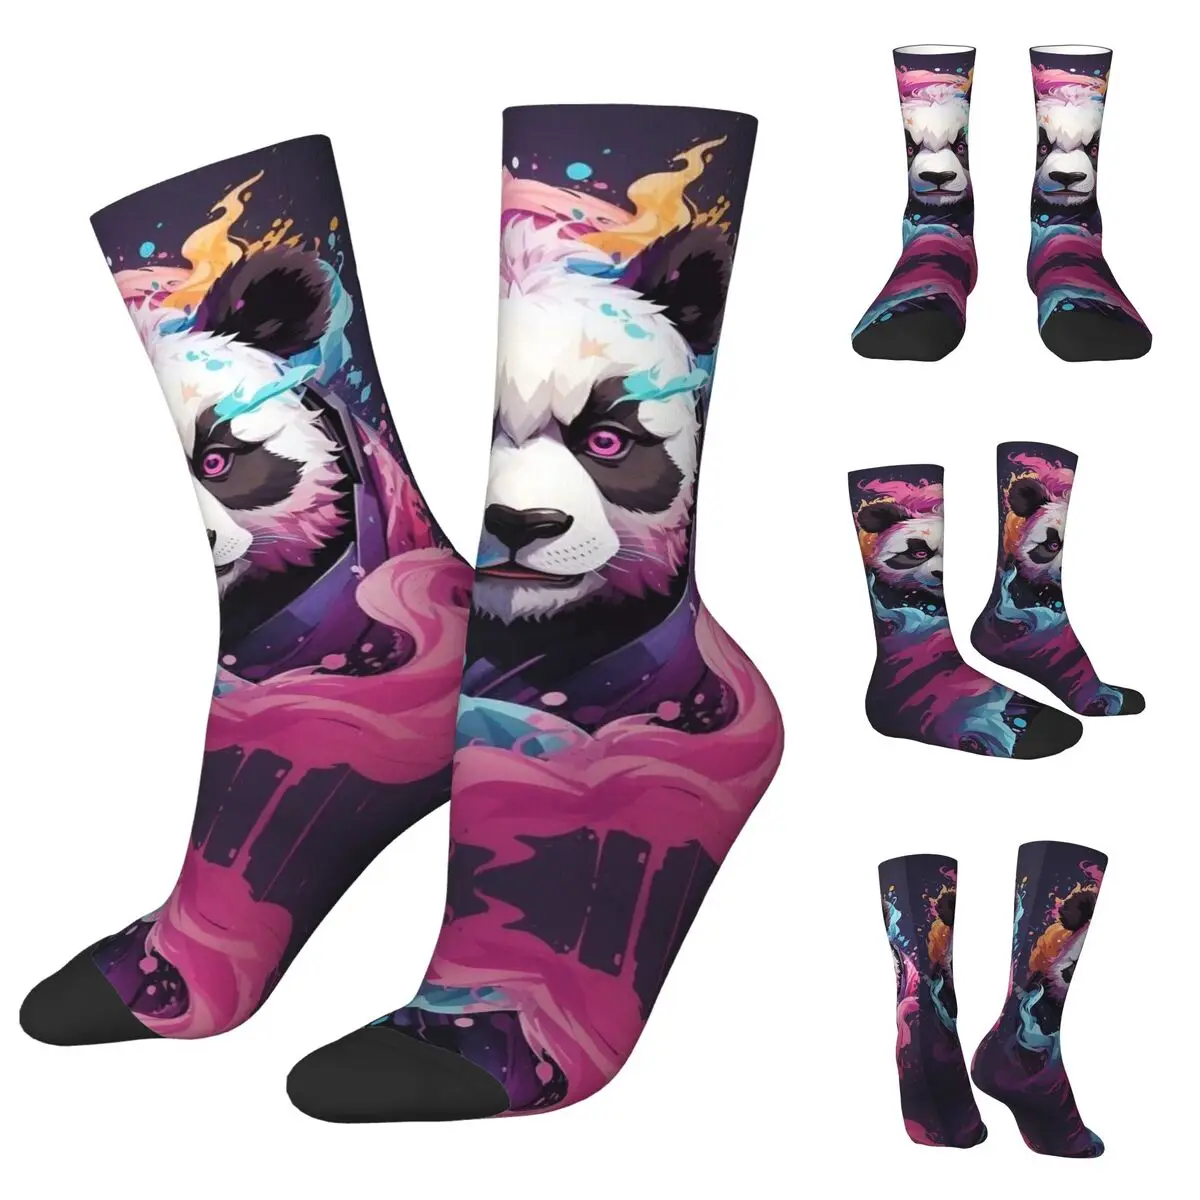 Cool Animals, Lions, Tigers, Gorillas Men Women Socks,Motion Beautiful printing Suitable for all seasons Dressing Gifts to the lions